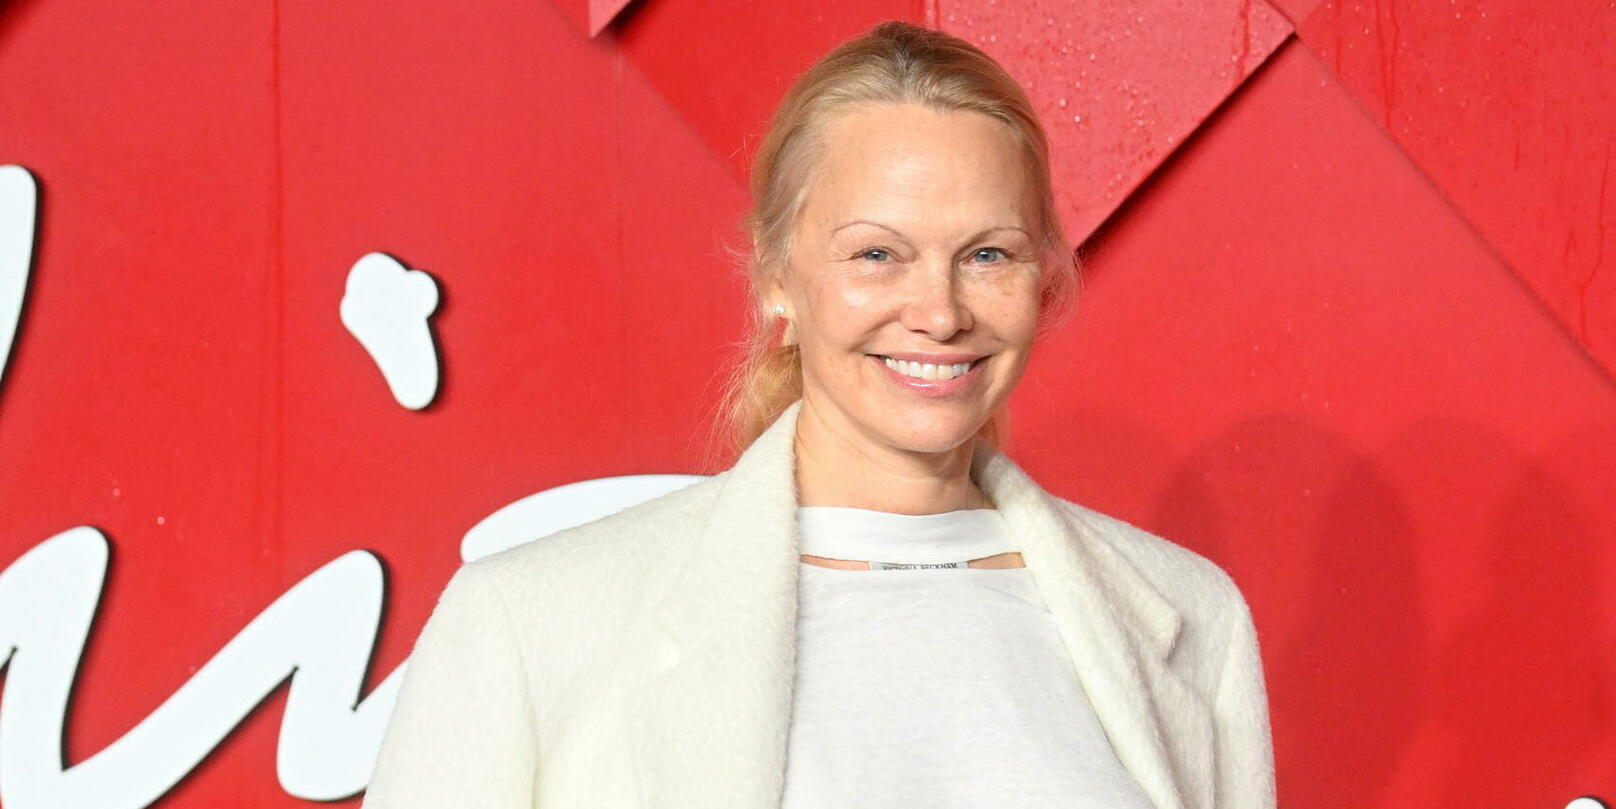 Why did Pamela Anderson decide not to wear makeup?